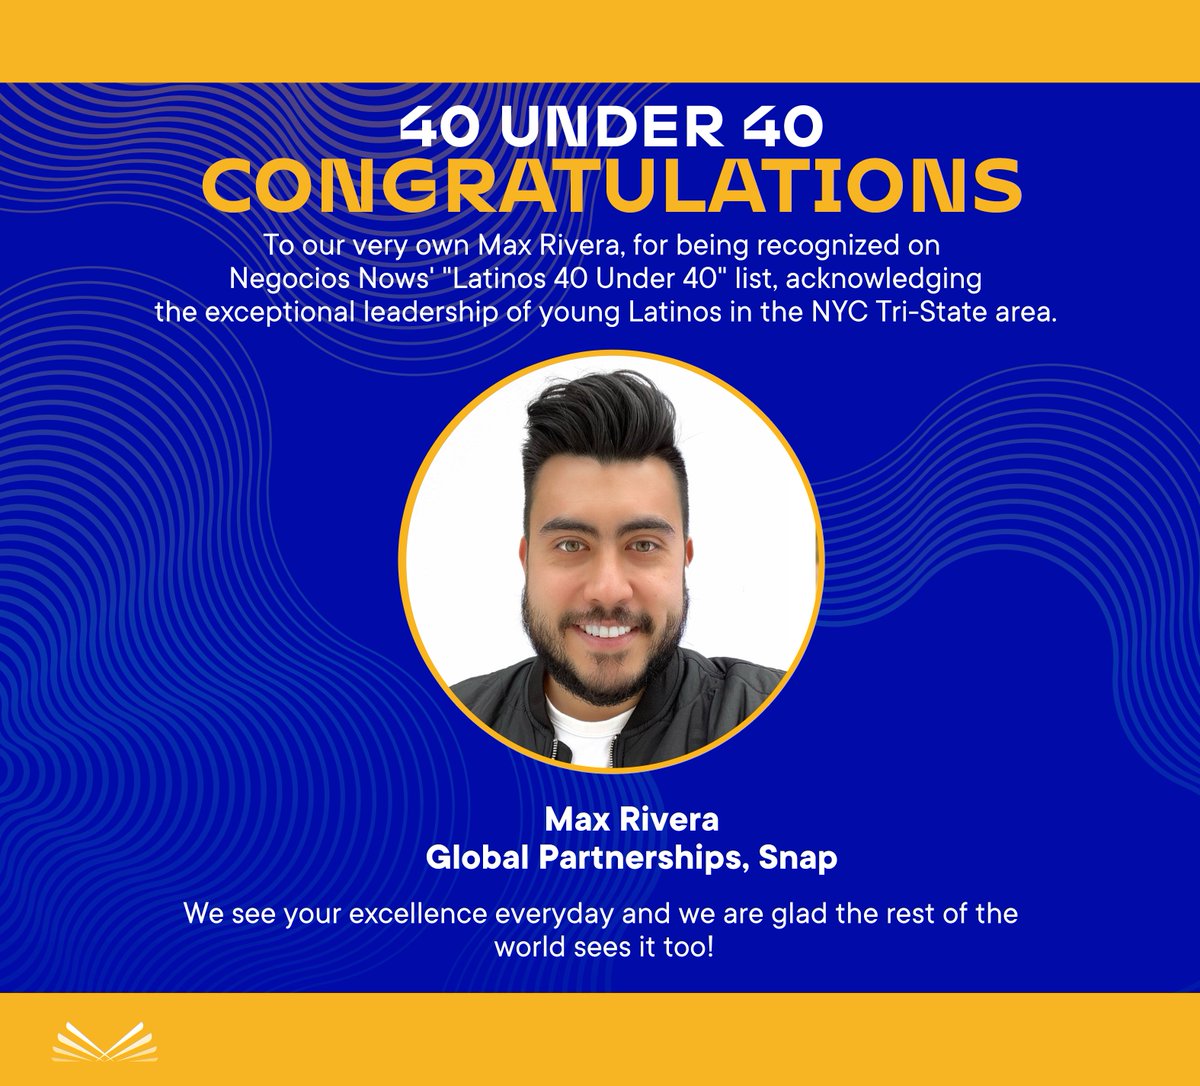 Congrats to our very own Max Rivera, who has been recognized on the @NEGOCIOSNOW 'Latinos 40 Under 40' list, highlighting the exceptional leadership of young Latinos in the NYC Tri-State area. View the full list here: negociosnow.com/negocios-now-u… #Latinos40Under40 #angelesmembers